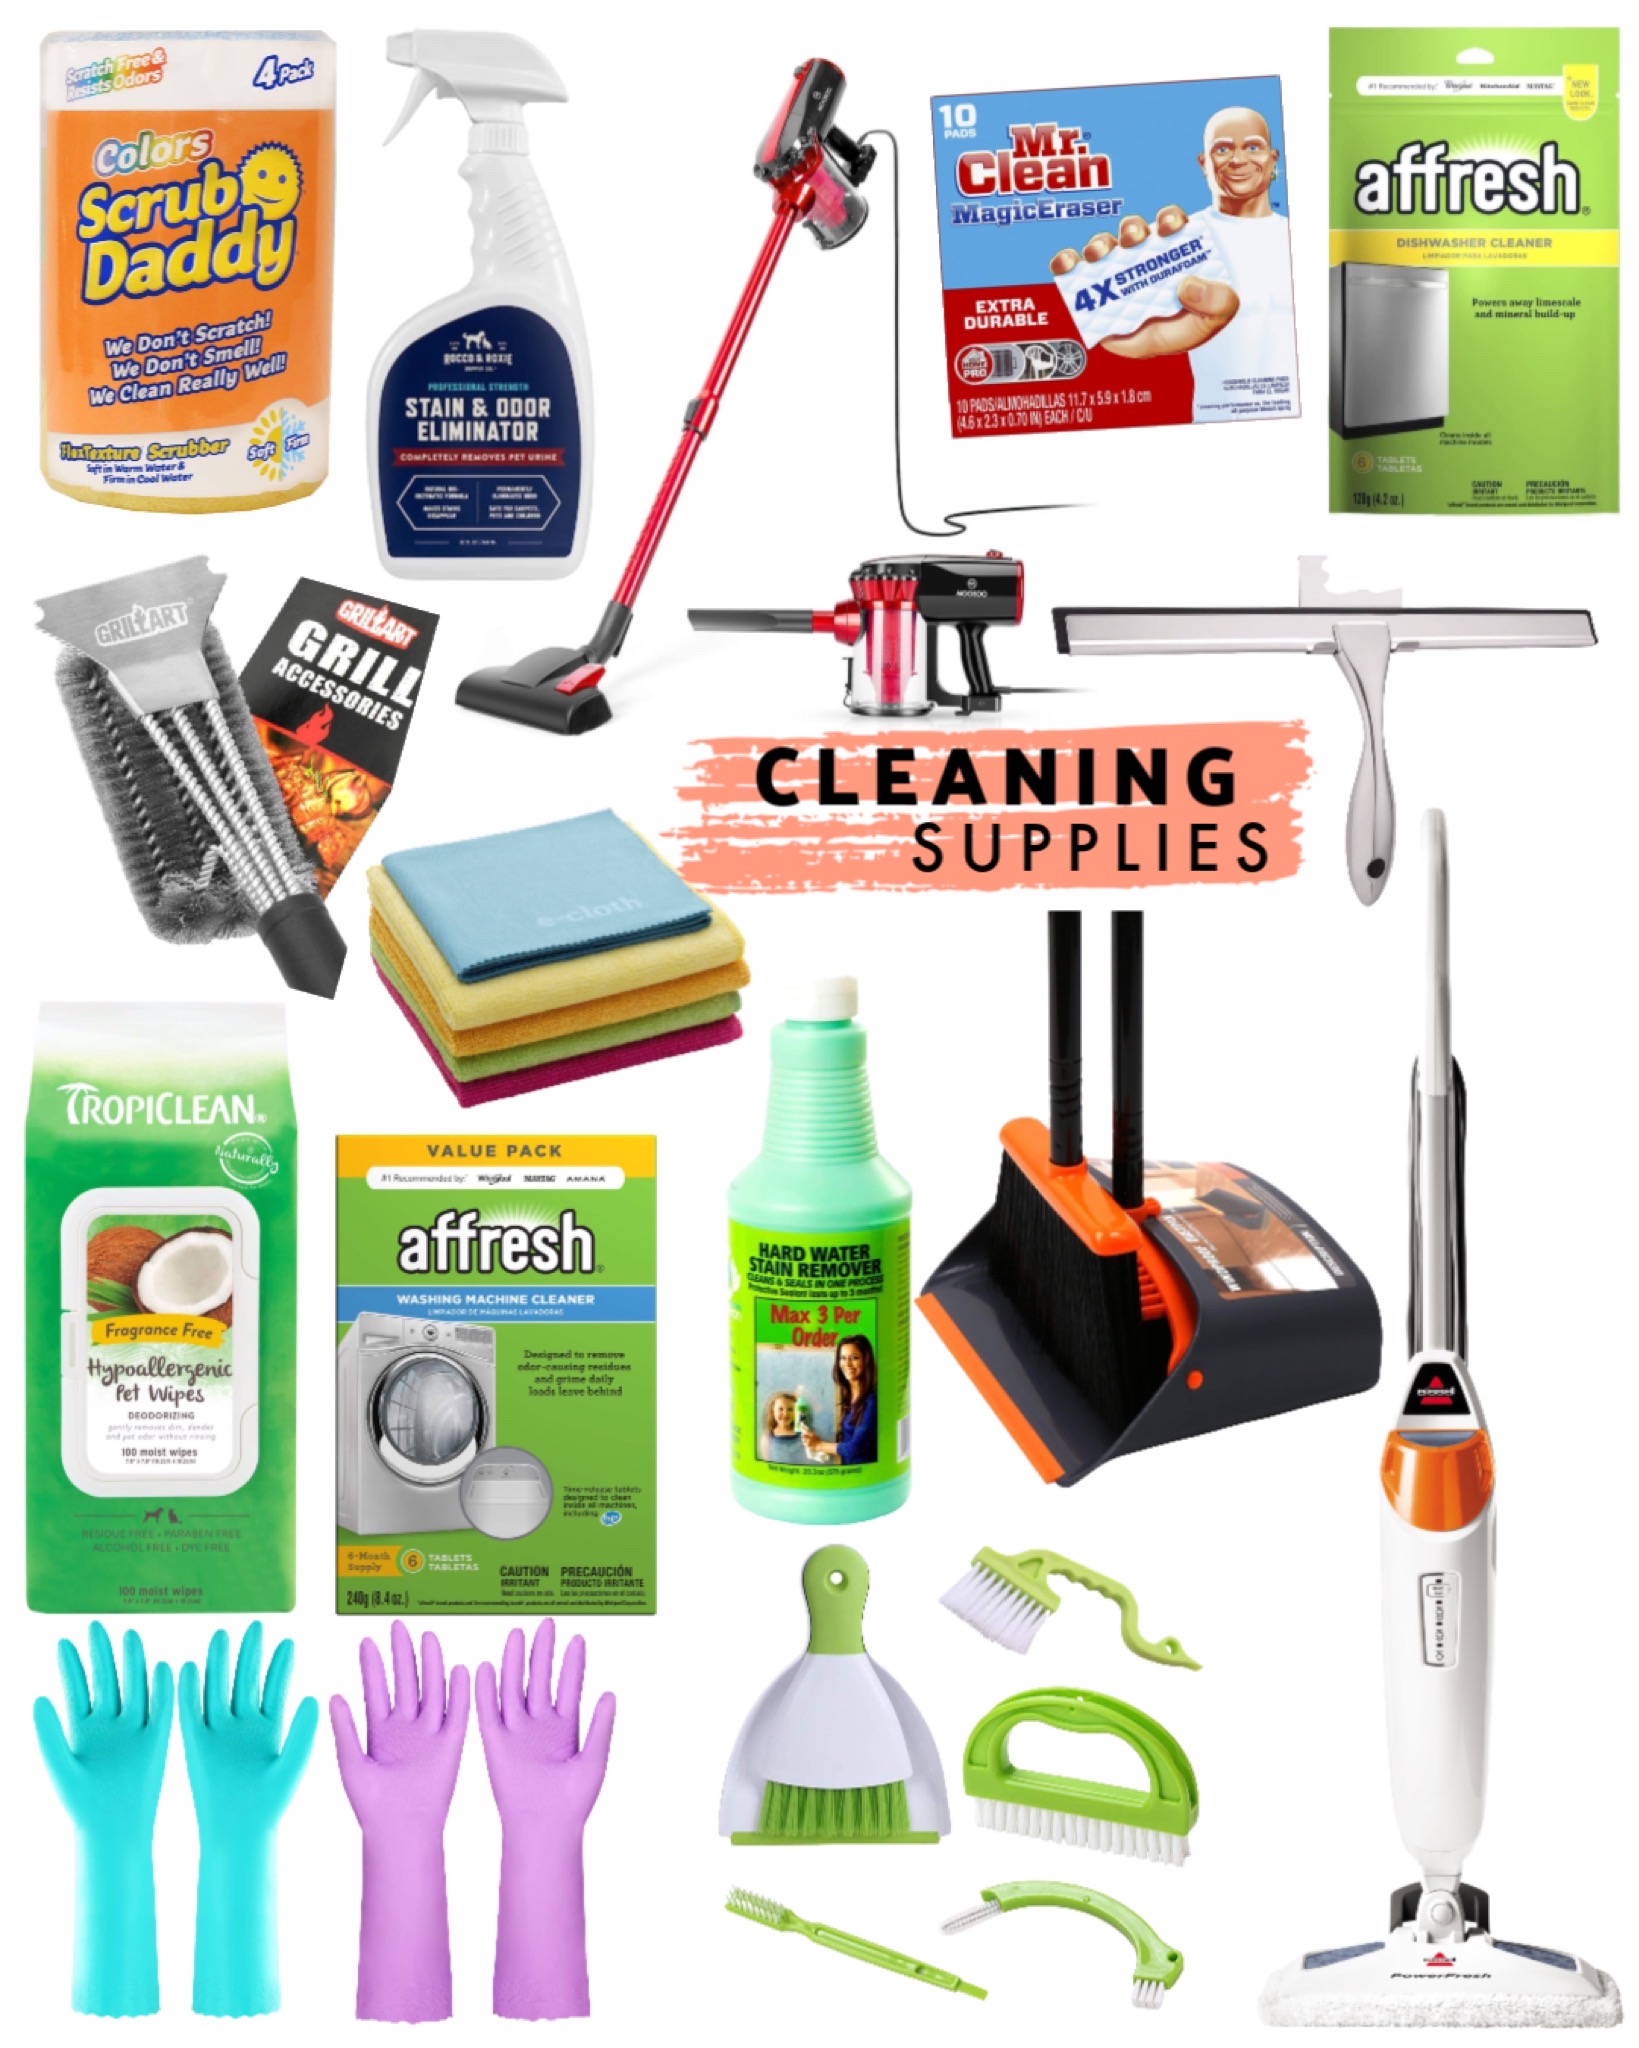 My Favorite Cleaning Supplies! - The Sister Studio